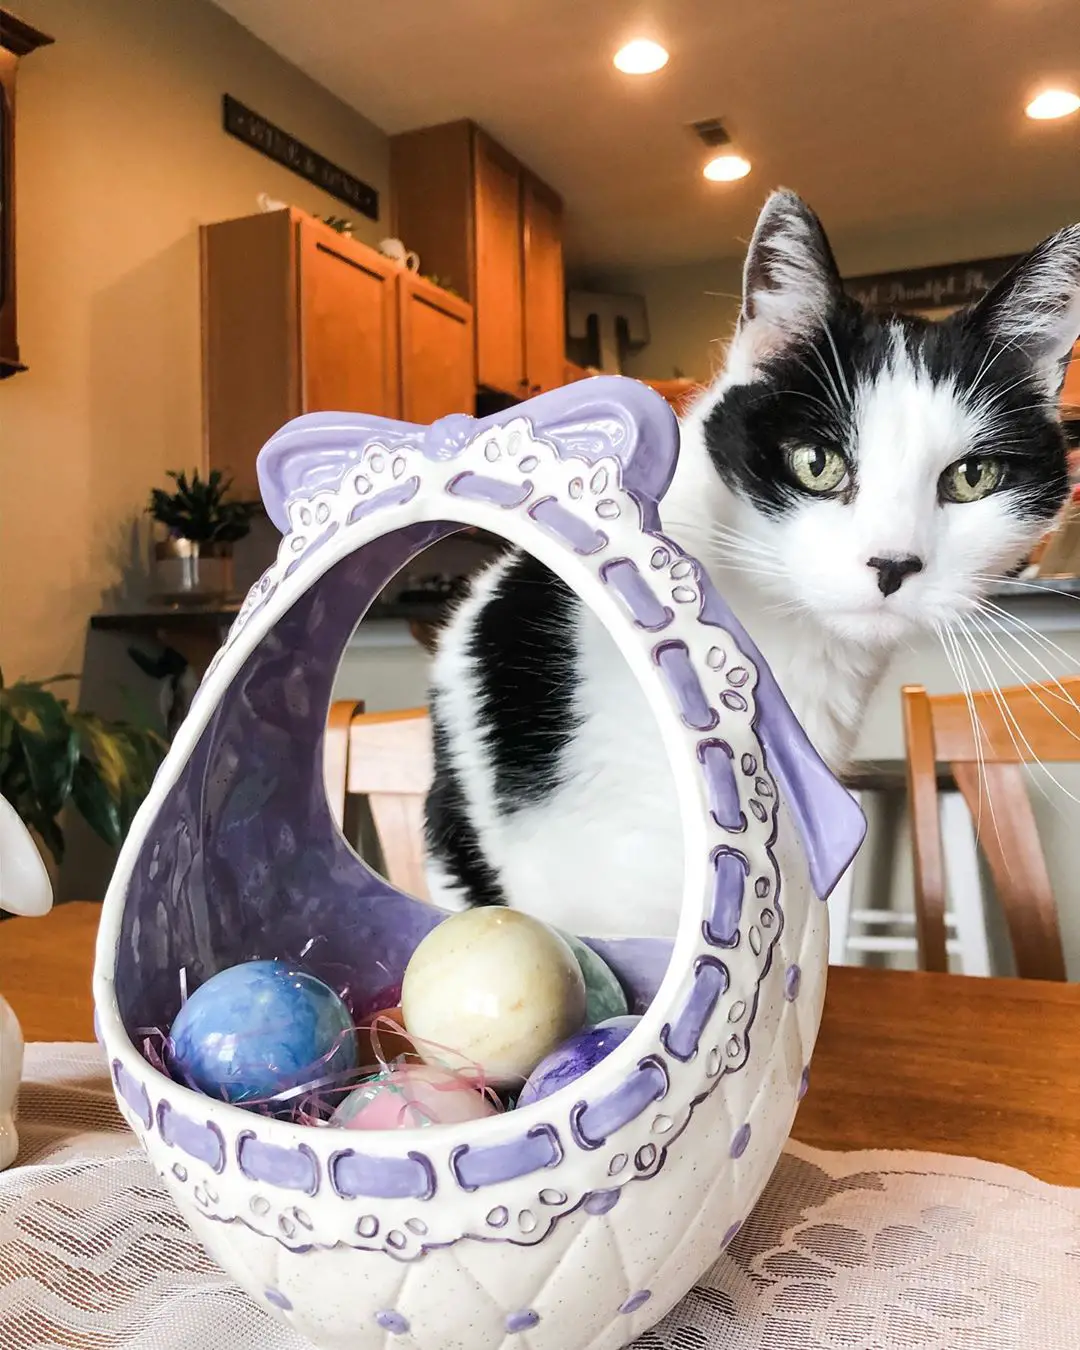 Precious Cat with Easter Eggs